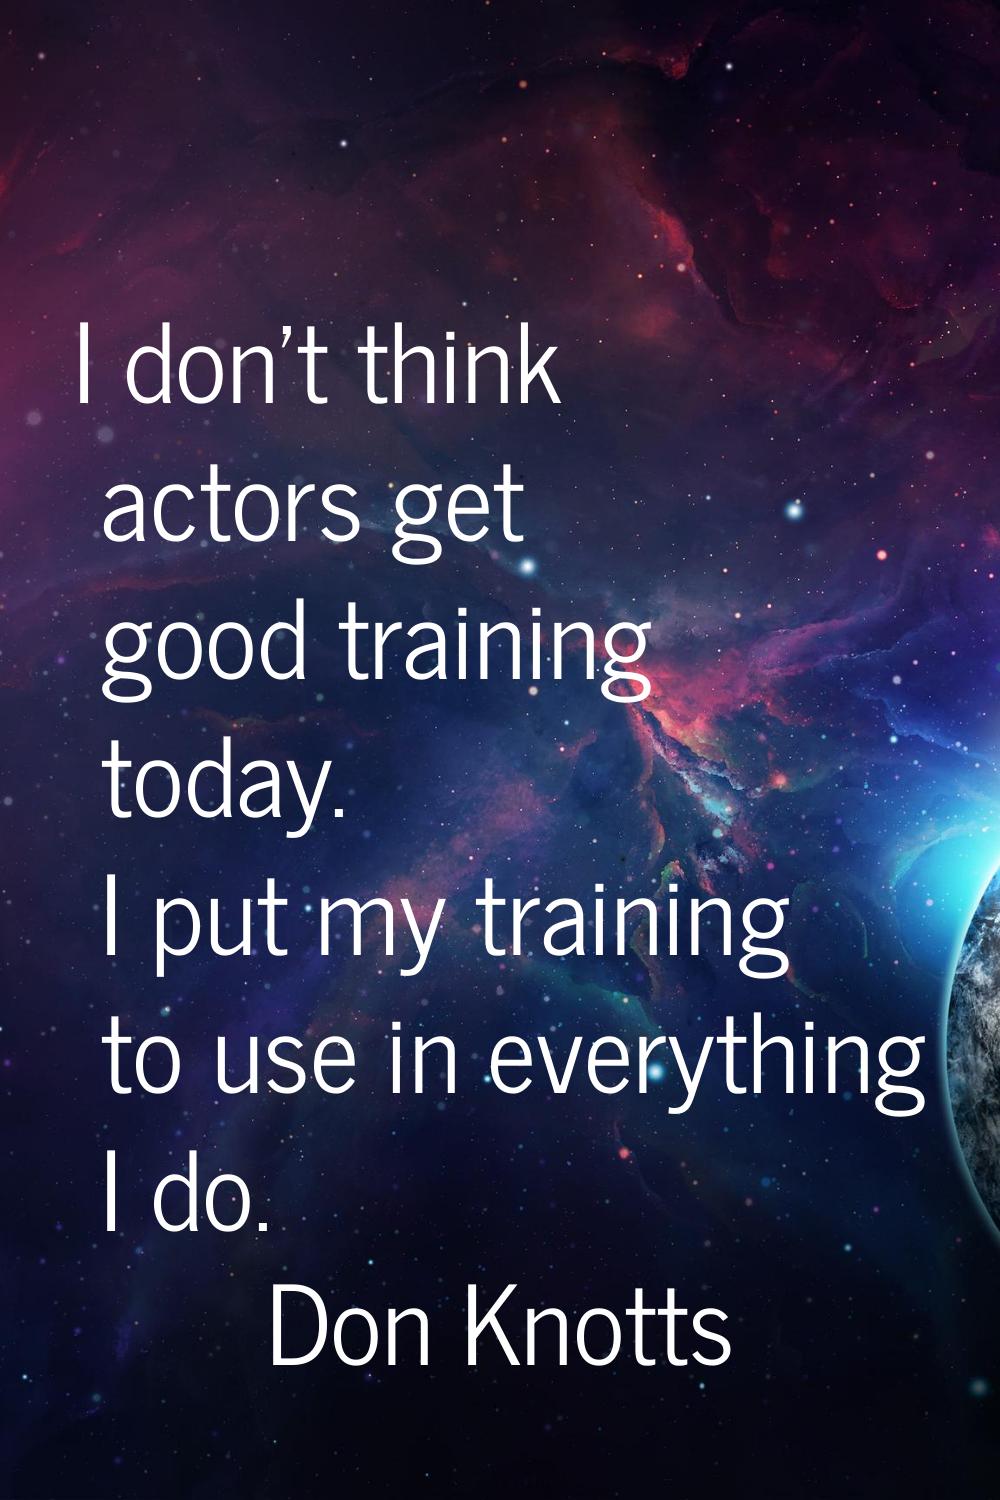 I don't think actors get good training today. I put my training to use in everything I do.